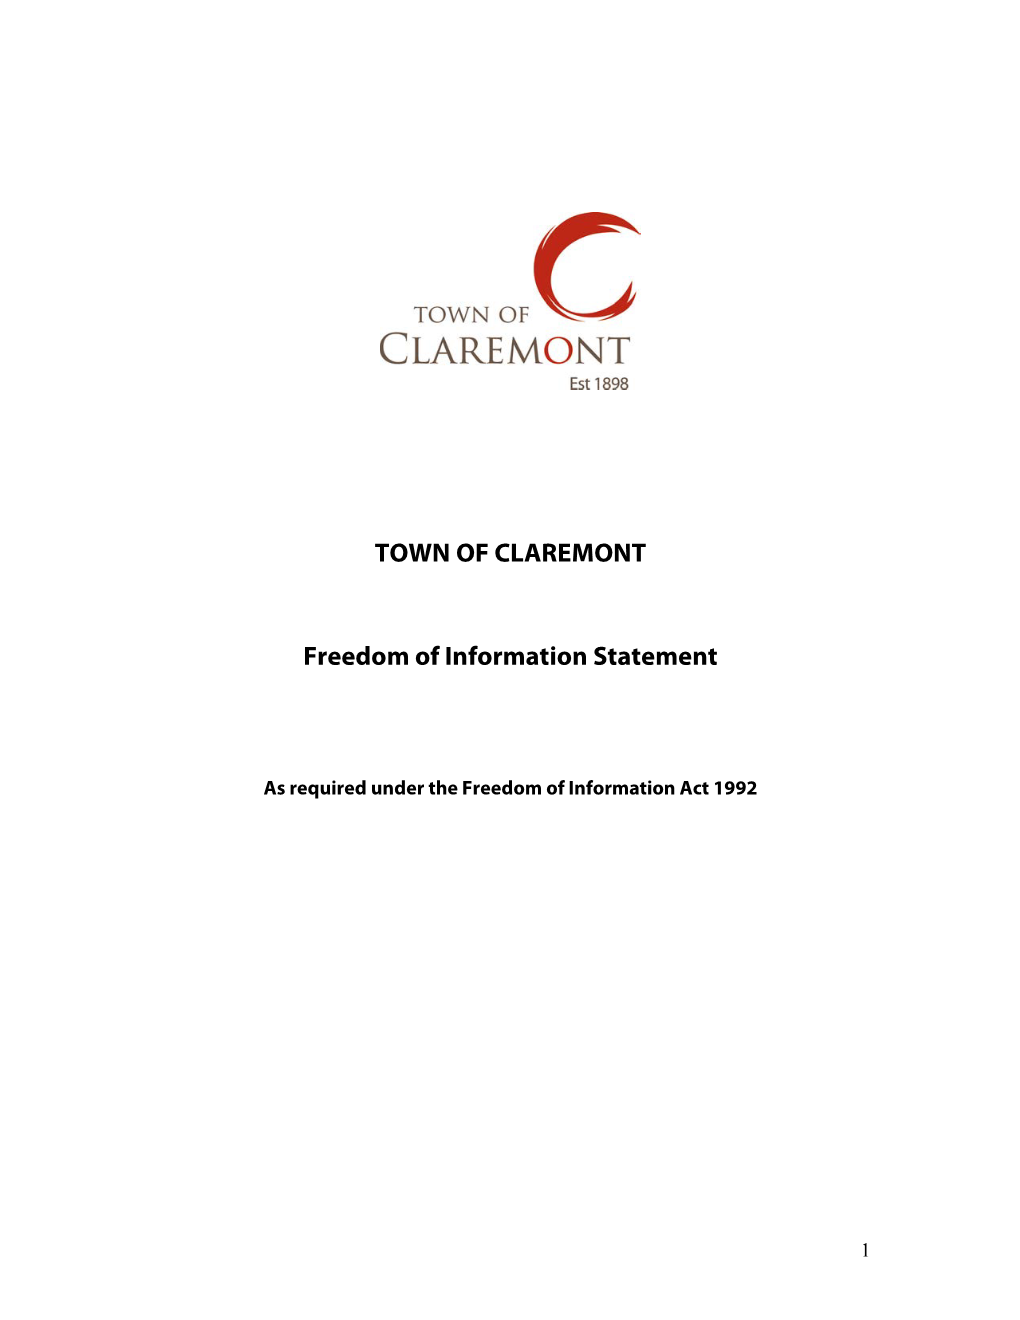 TOWN of CLAREMONT Freedom of Information Statement